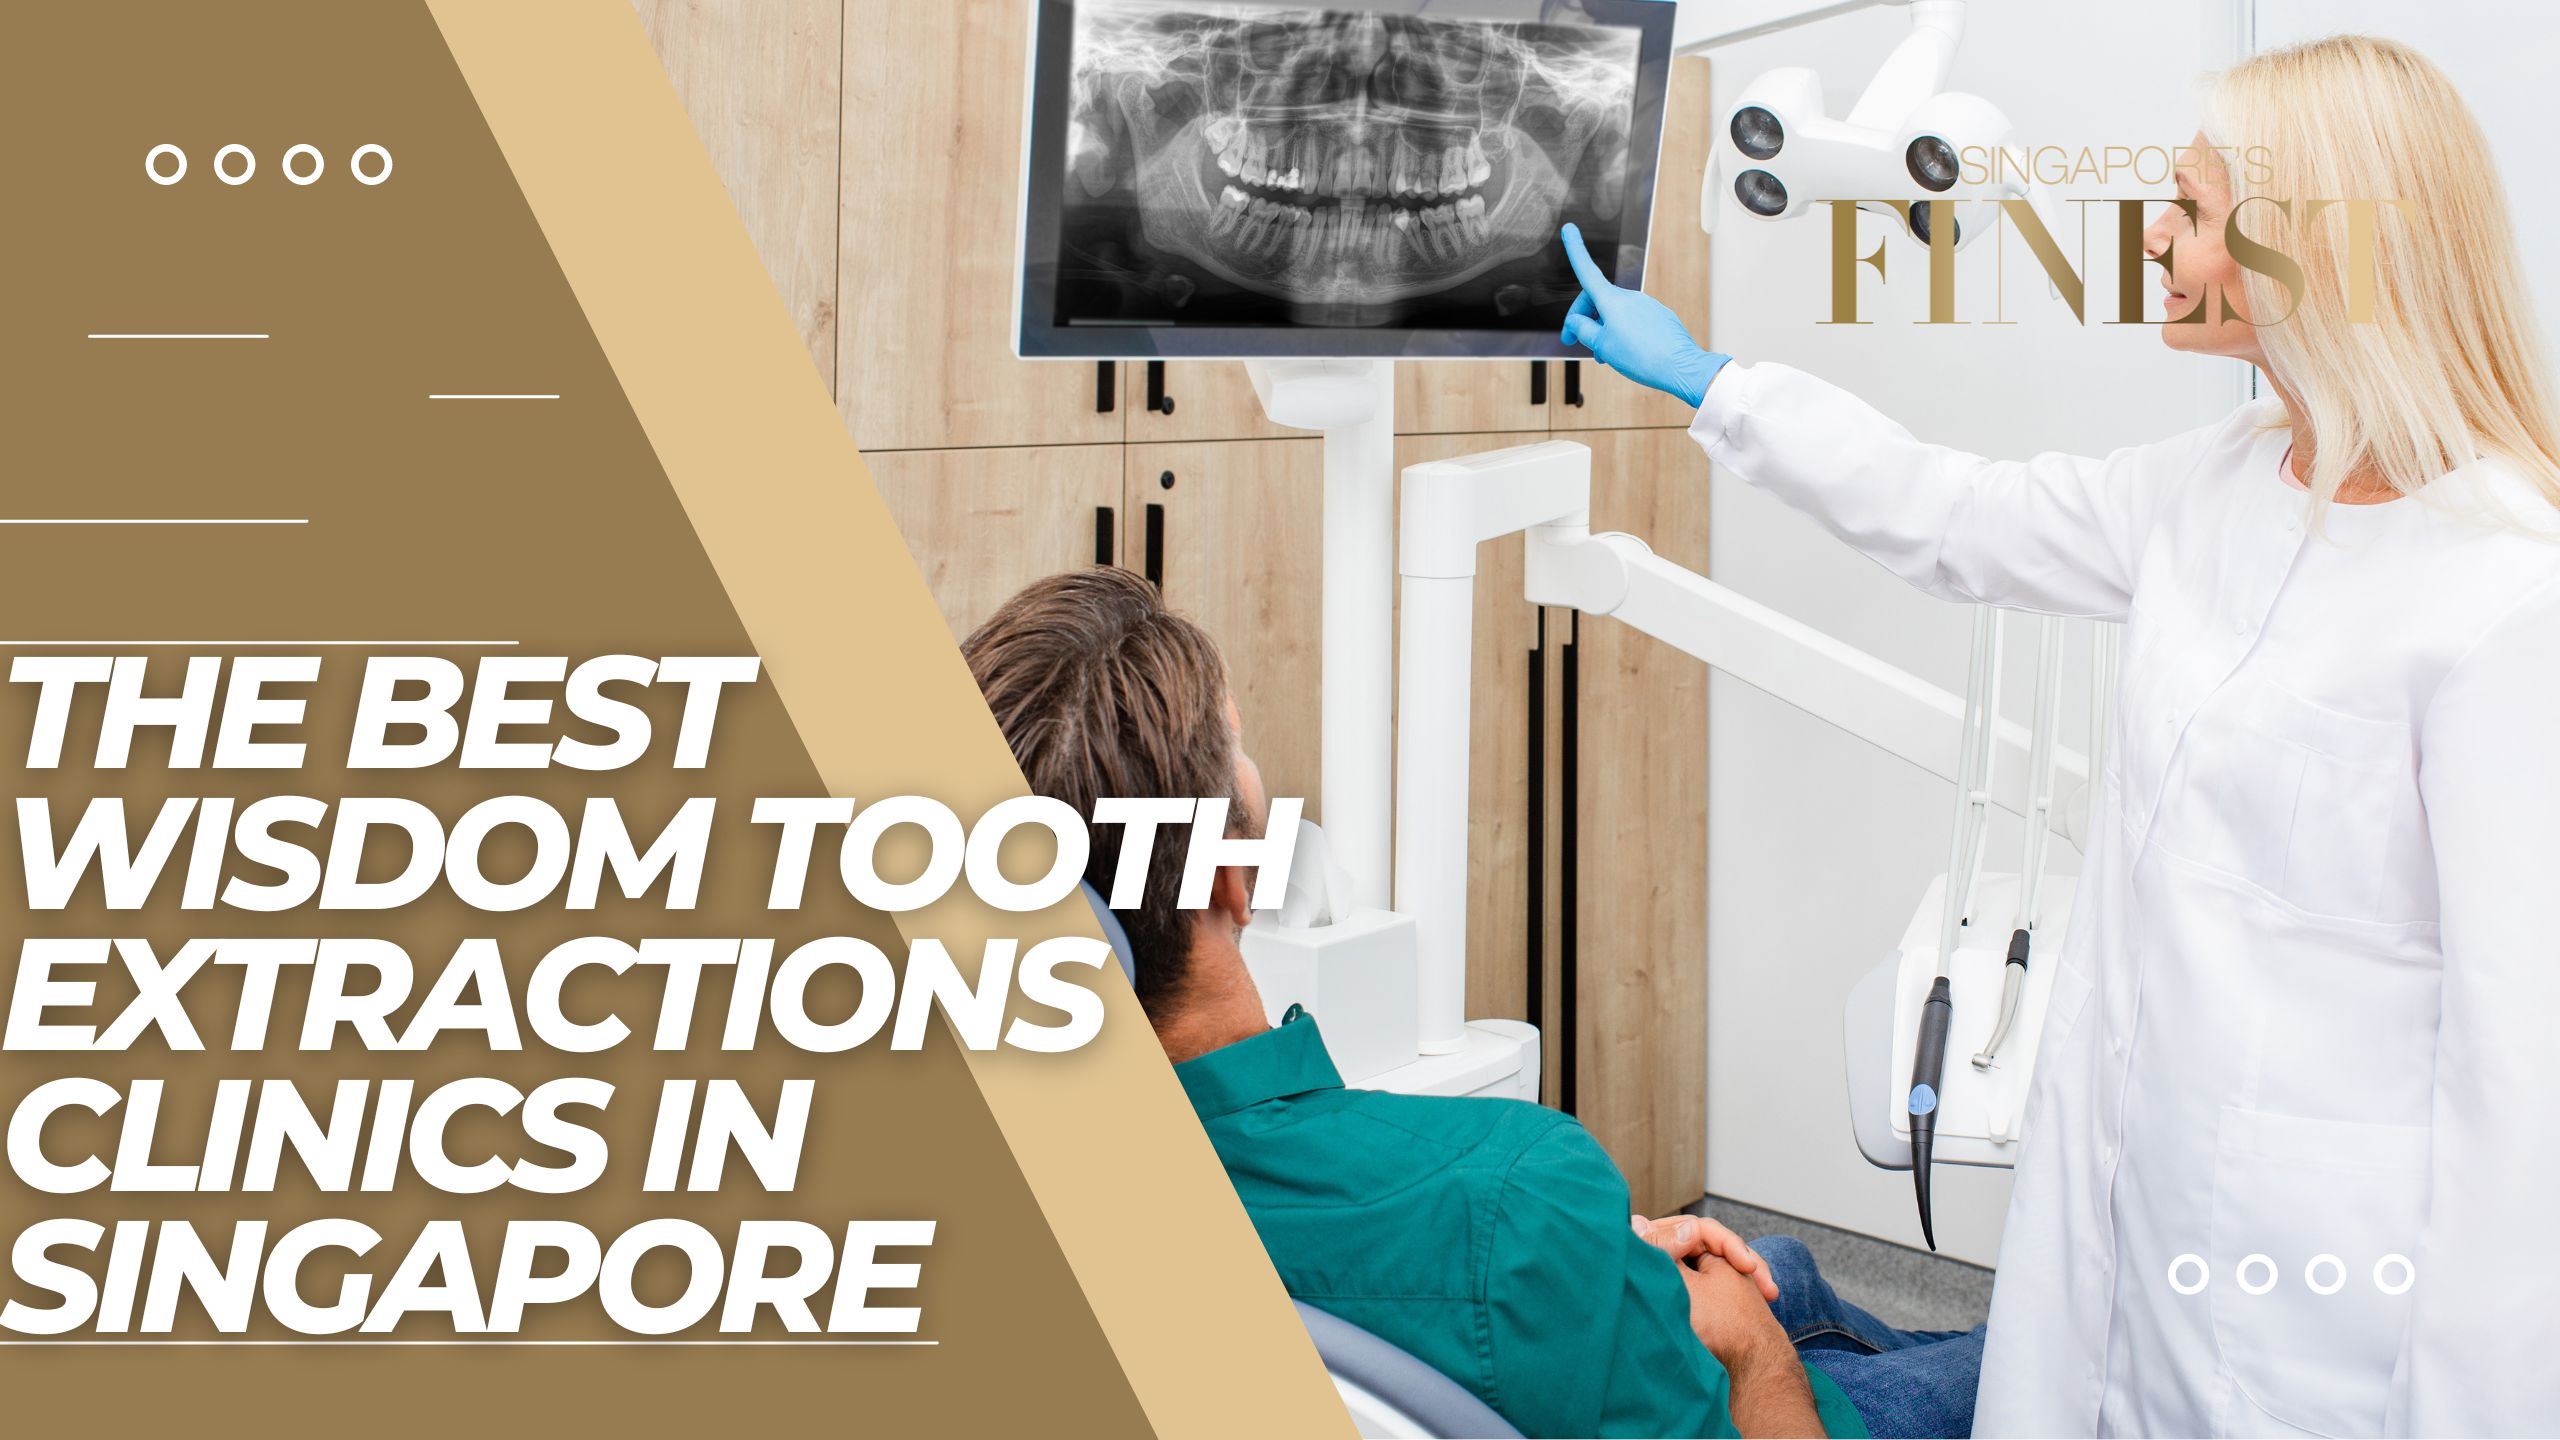 The Finest Wisdom Tooth Extraction Clinics in Singapore